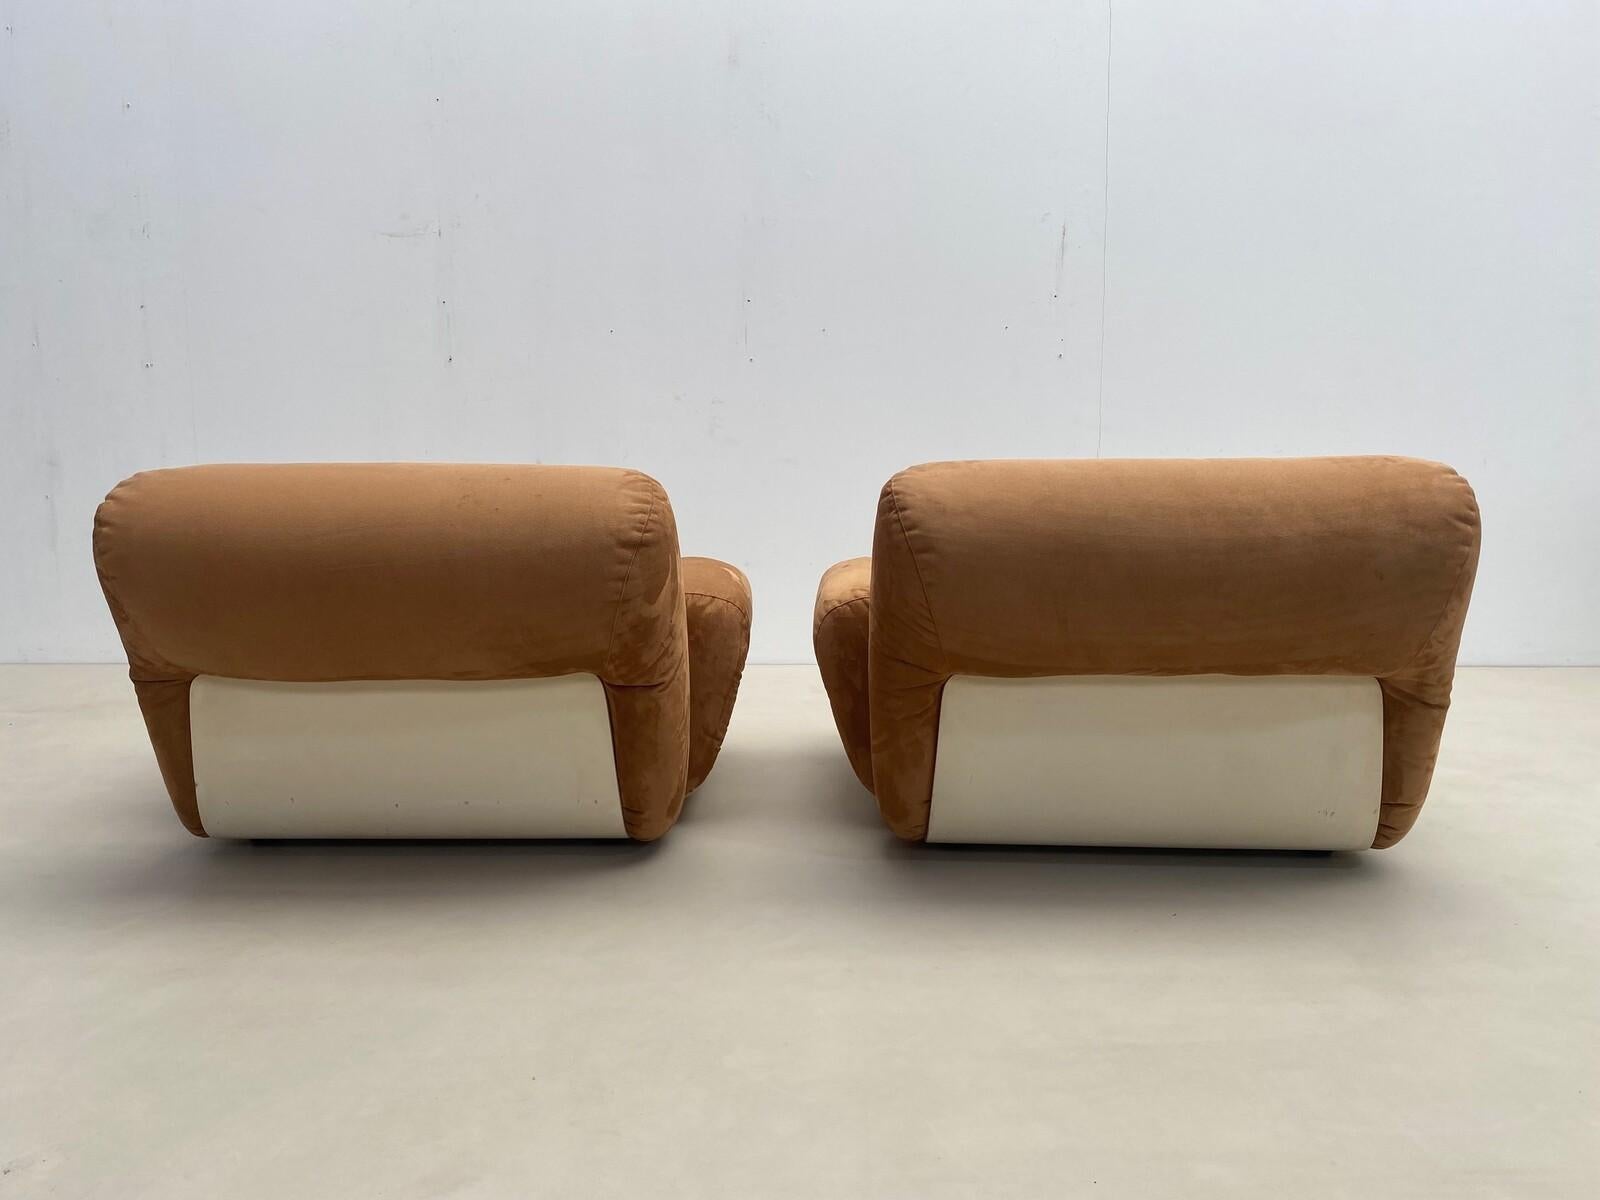 Pair of Mid-Century Modern Nubuck Leather Lounge Chairs, Italy, 1970s For Sale 7